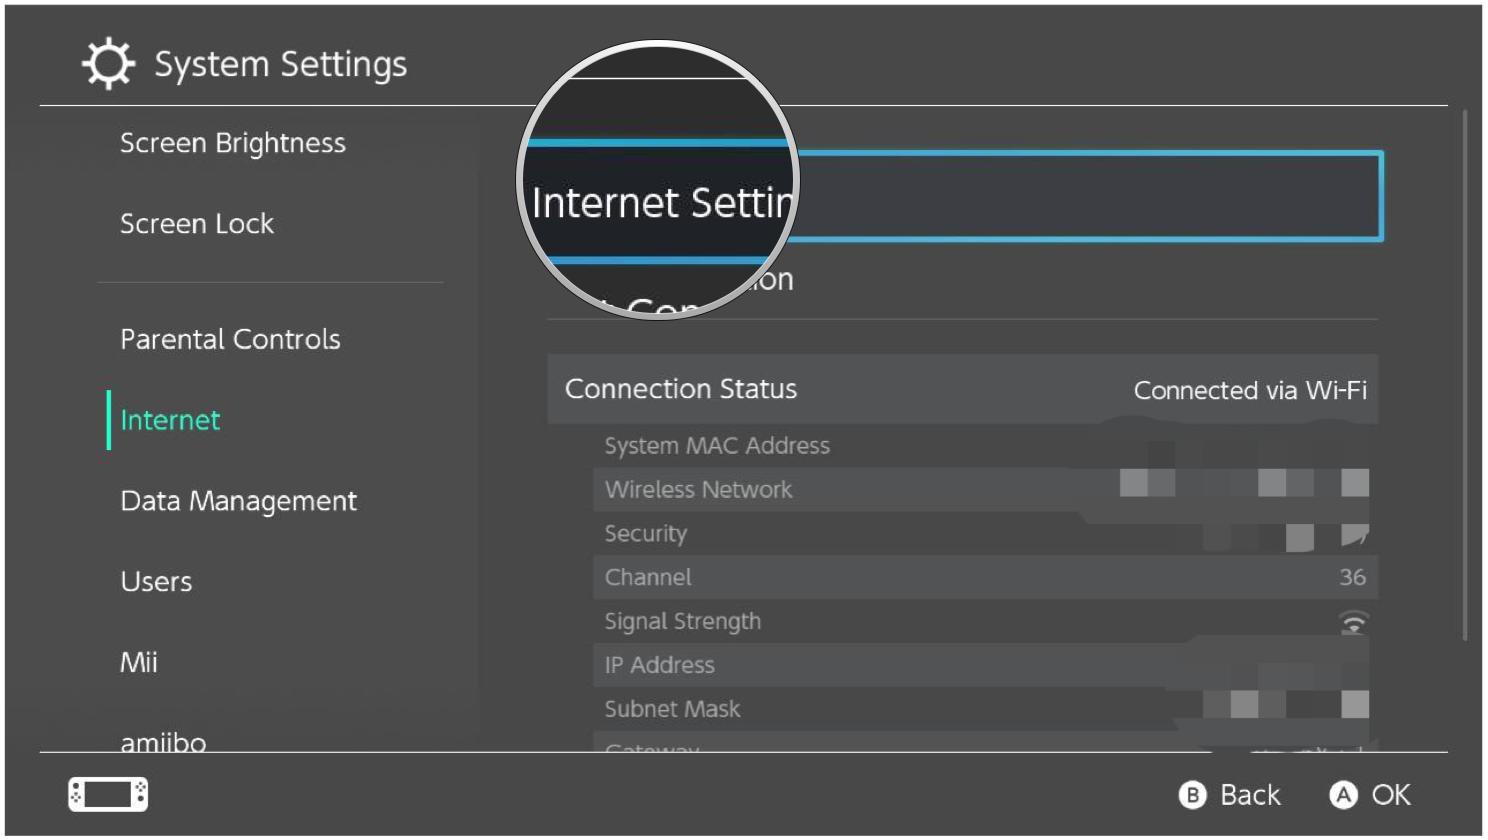 How to connect to a hotspot on your Nintendo Switch by showing steps: Under Internet, select Internet Settings